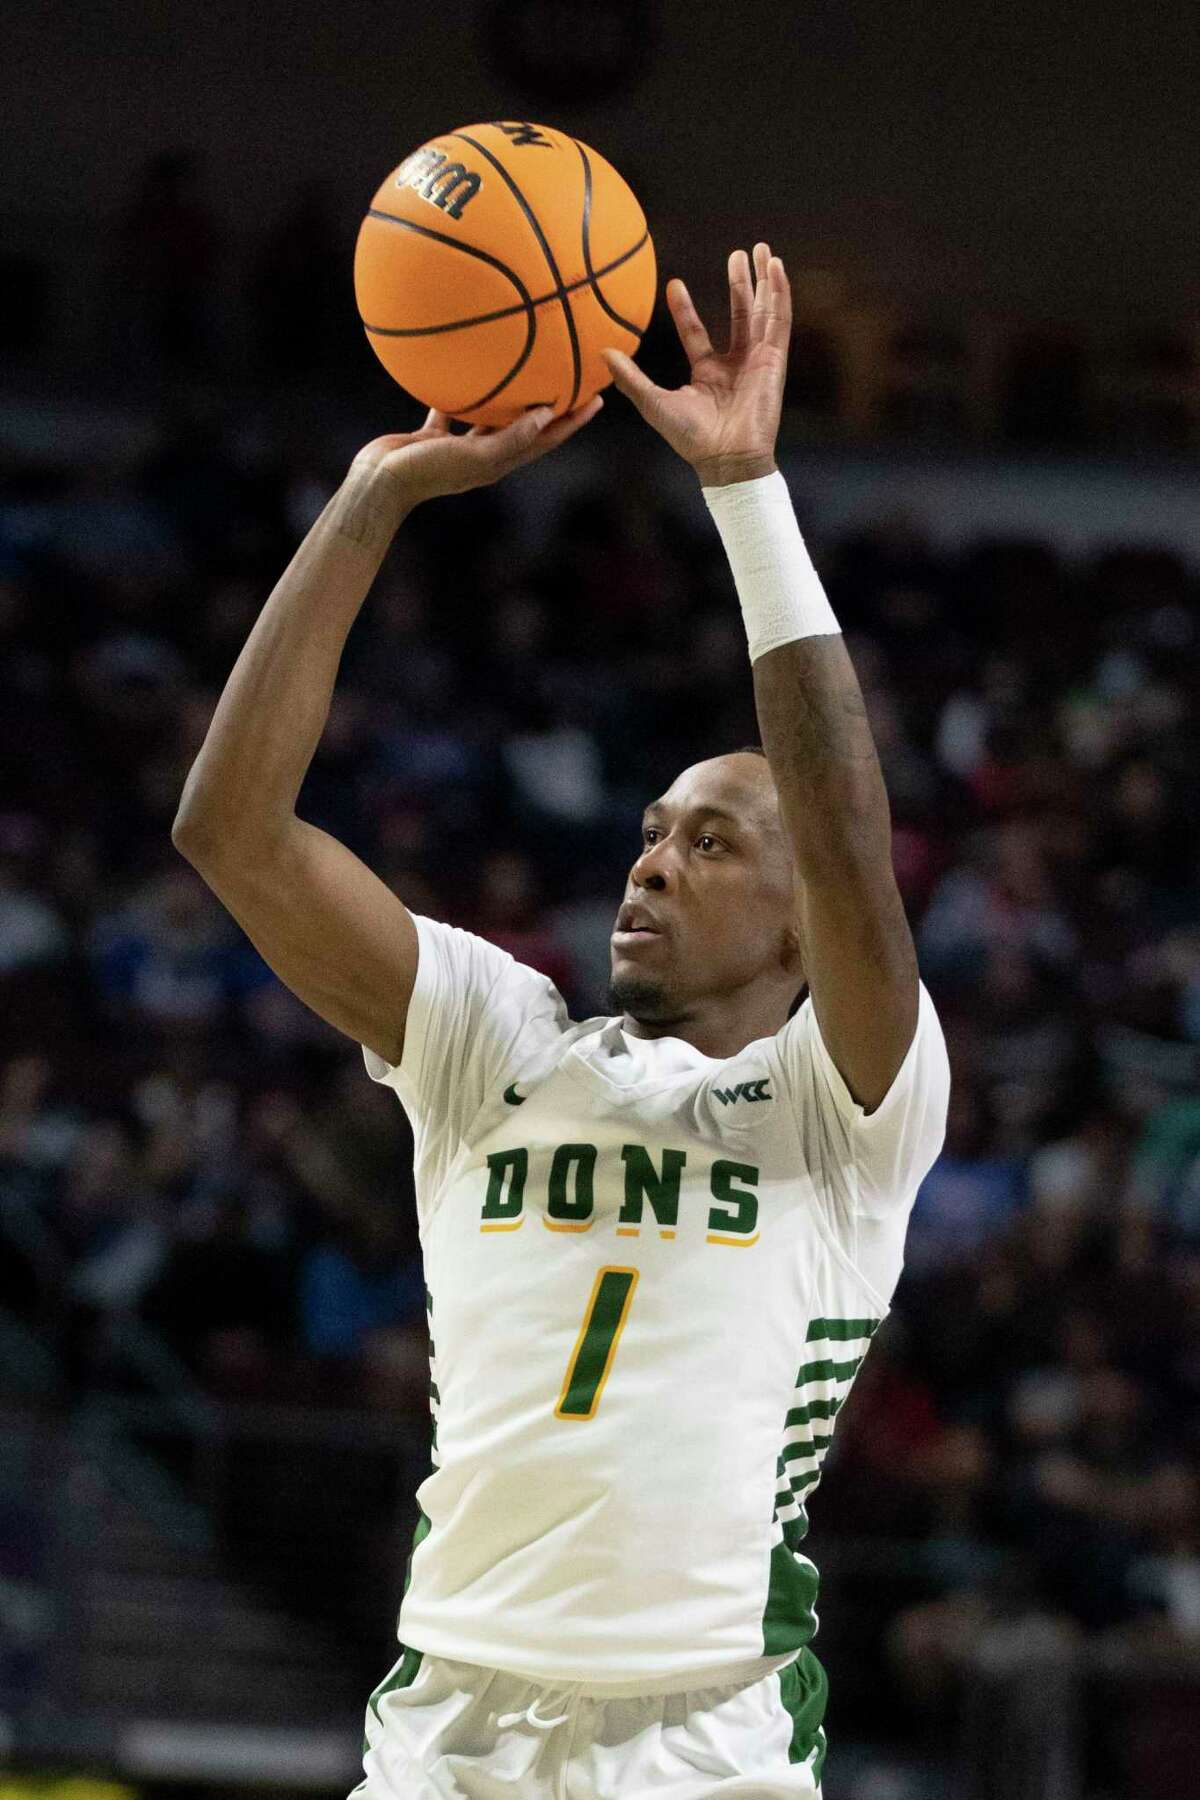 USF's Jamaree Bouyea takes a jumper against BYU in a WCC quarterfinal in Las Vegas on Saturday night.